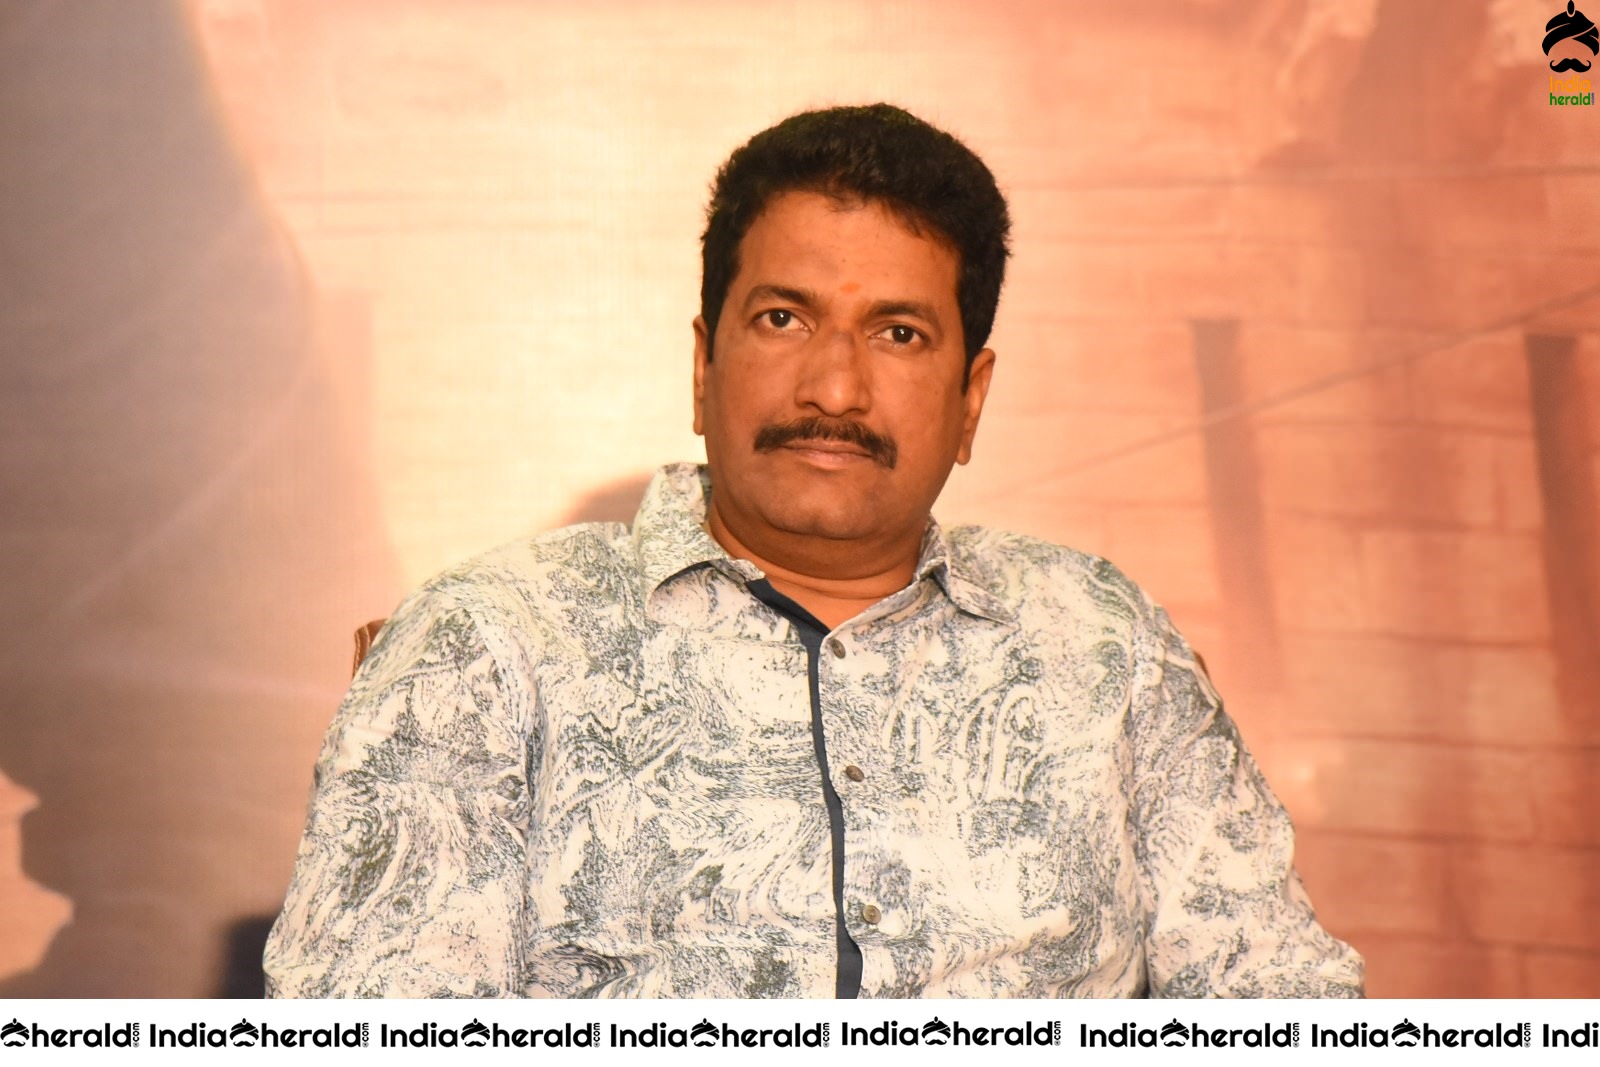 Producer Anil Sunkar speaks about his future projects under his banner